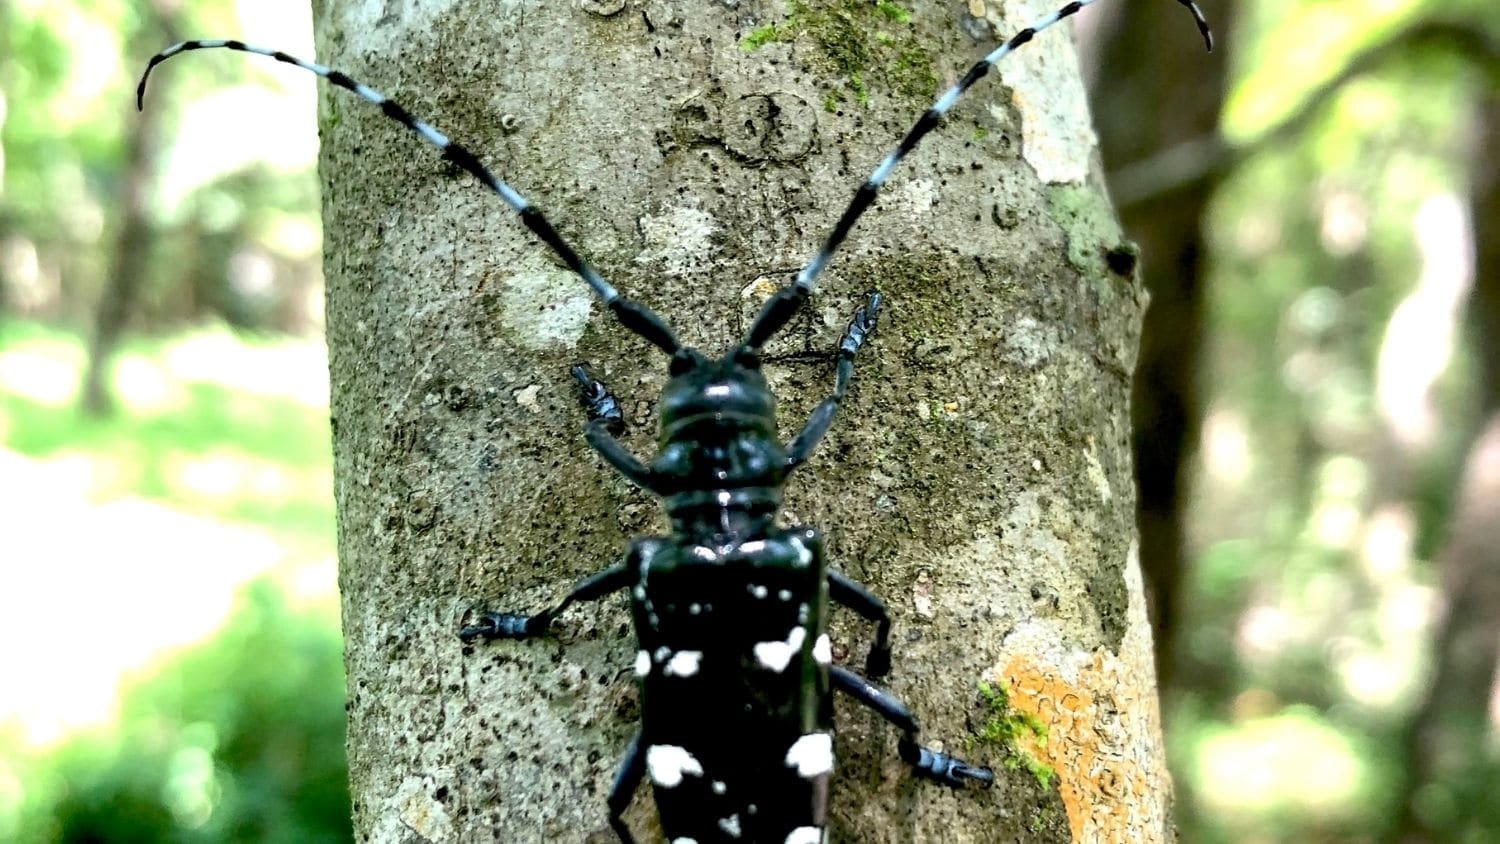 Asian longhorned beetle - Forestry Experts Want You to Watch Out for 'Poolside Pests' - Forestry and Environmental Resources NC State University